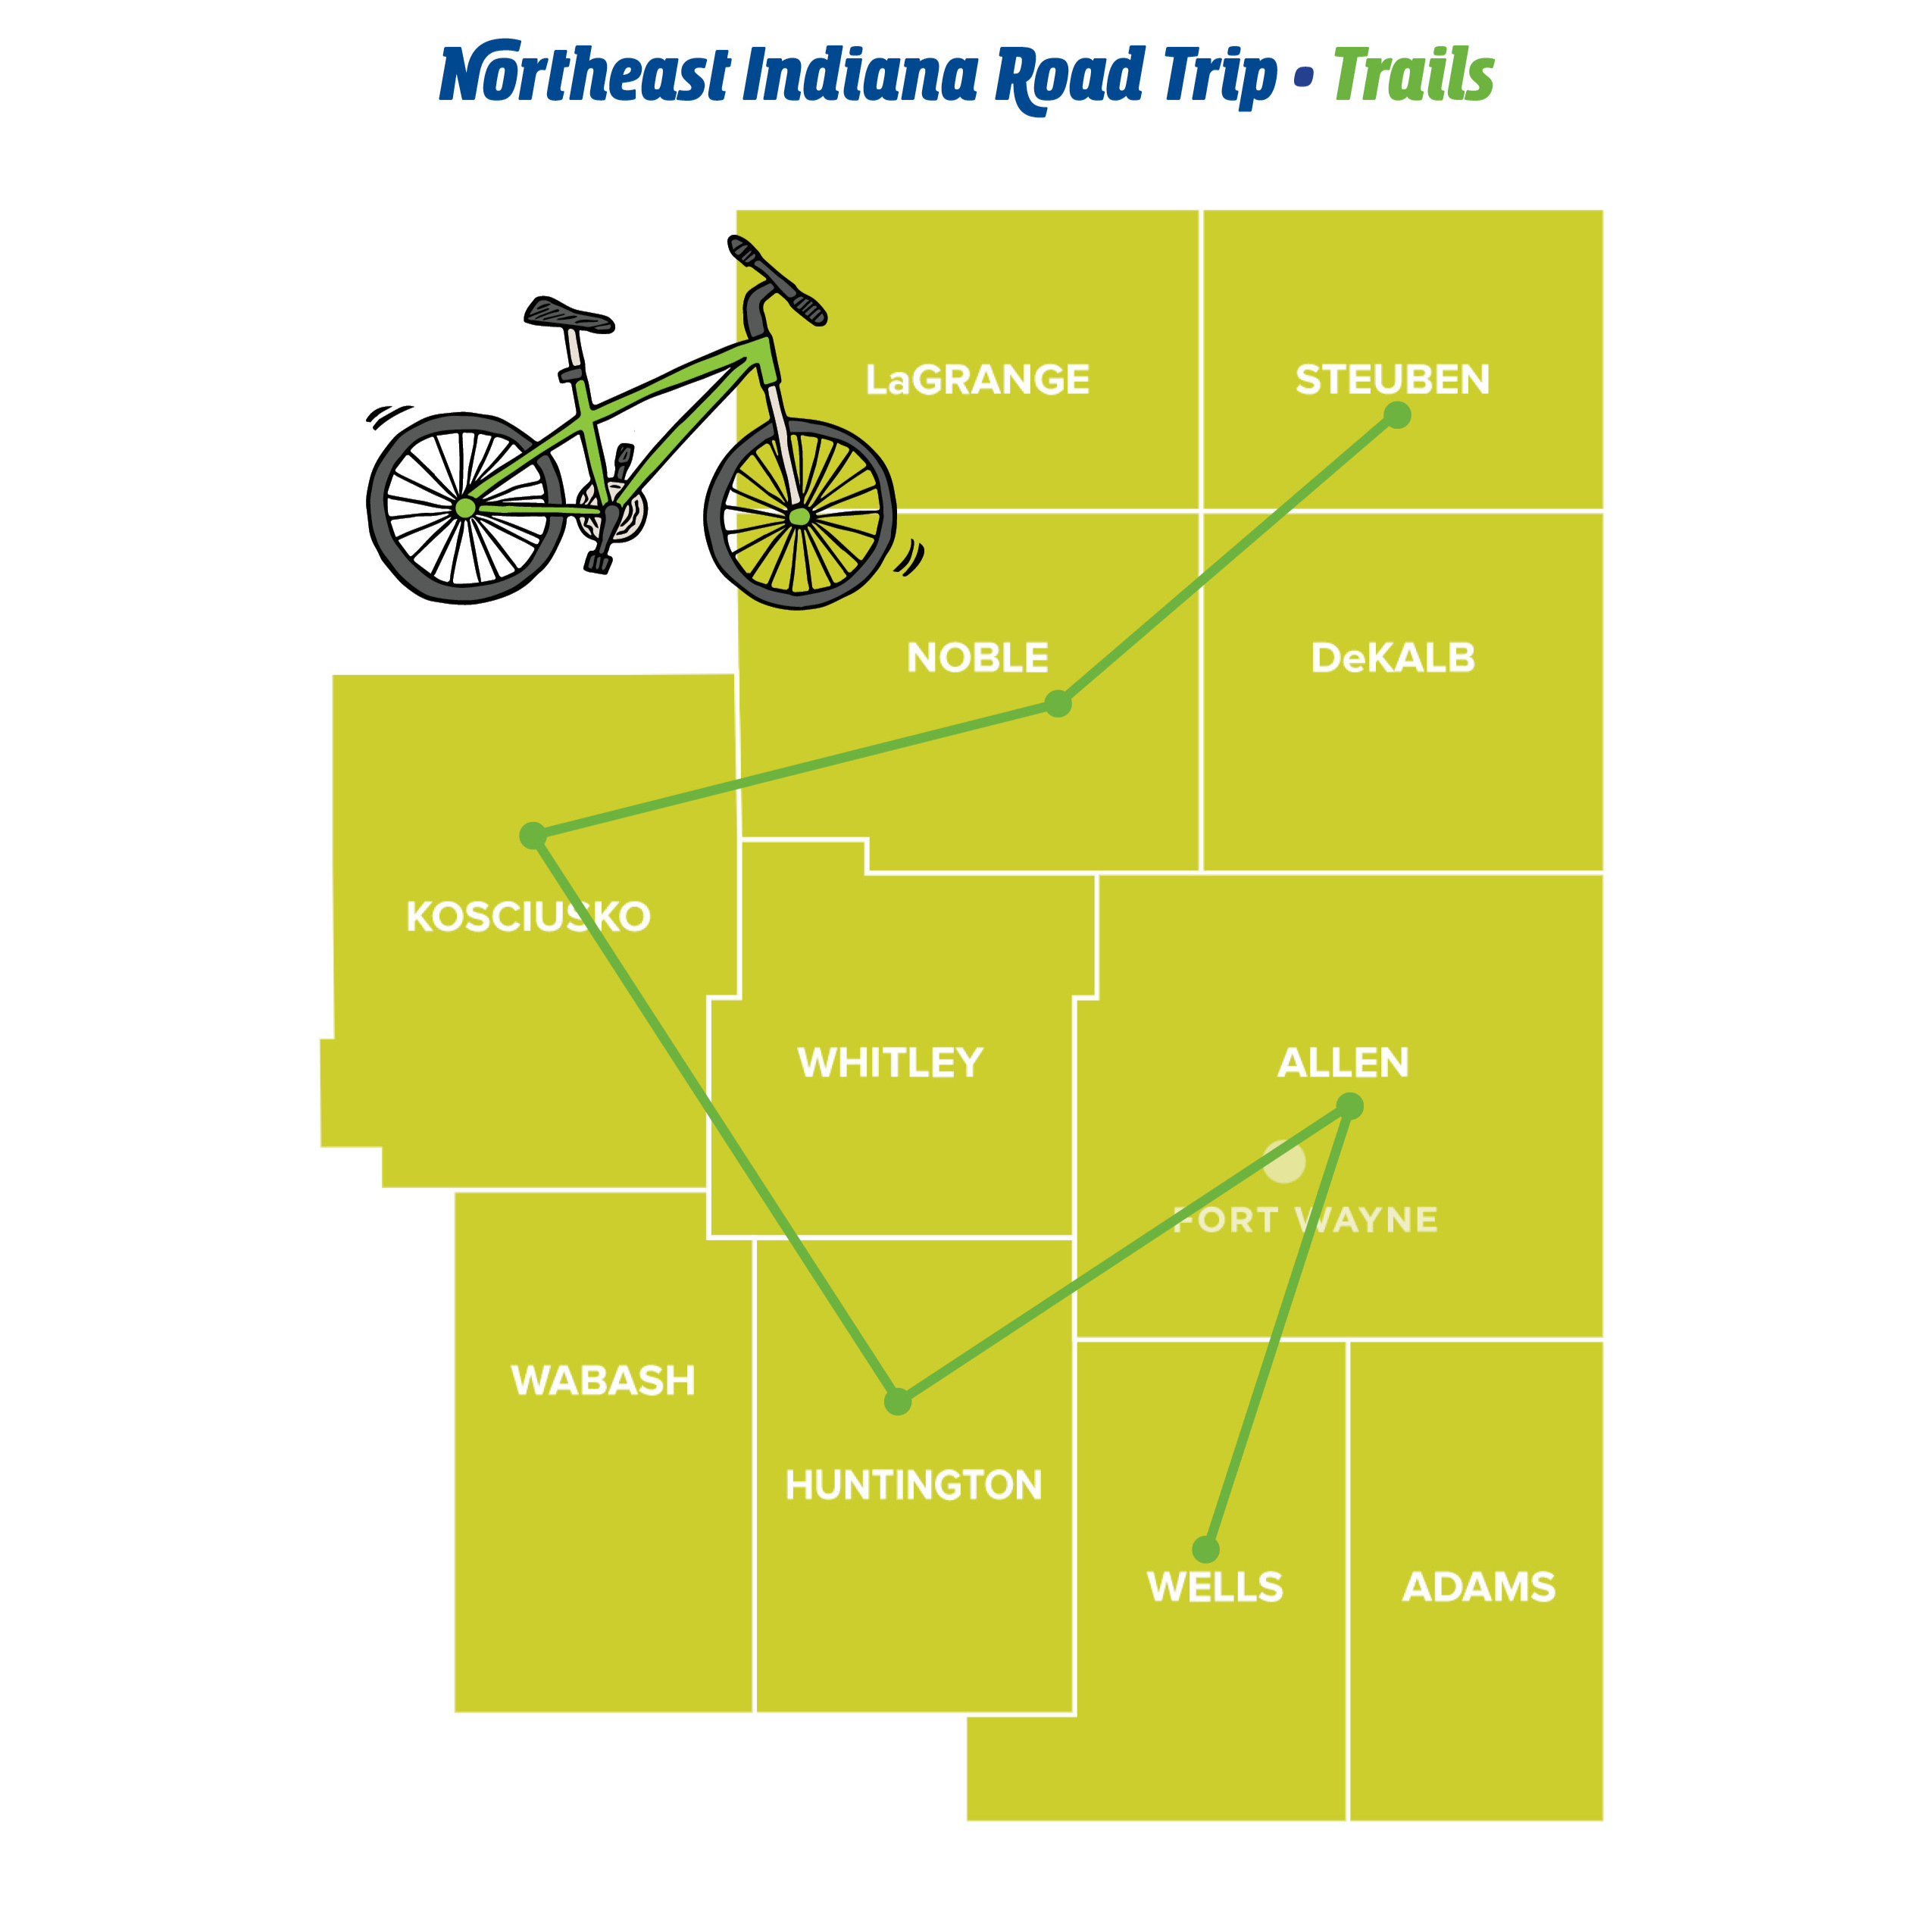 Trails - Northeast Indiana Road Trips